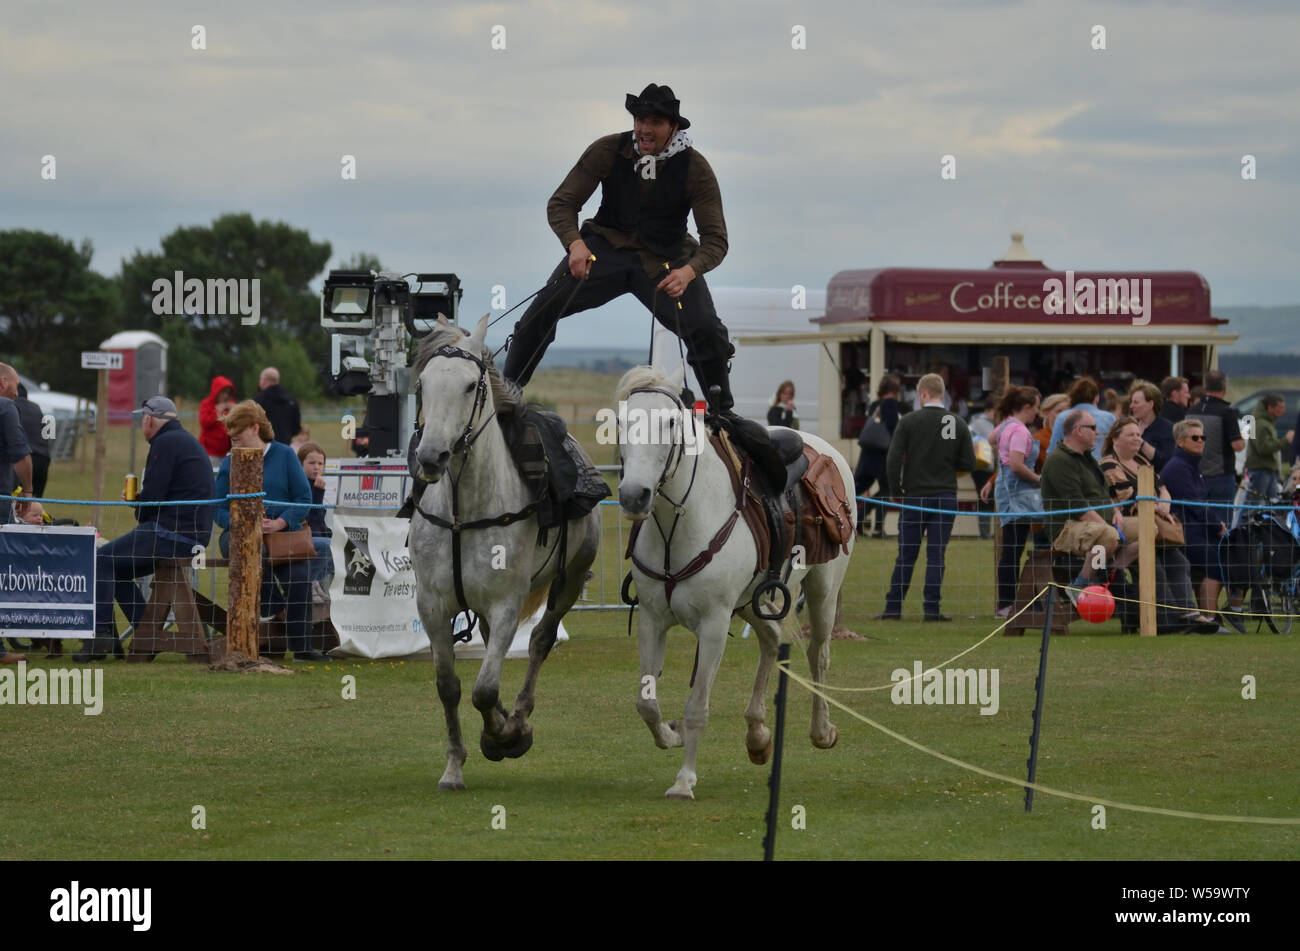 A man in Cowboy dress riding astride on two horses as part of a Wild West horse display at the 2019 Sutherland County Agricultural Show, Scotland, UK Stock Photo